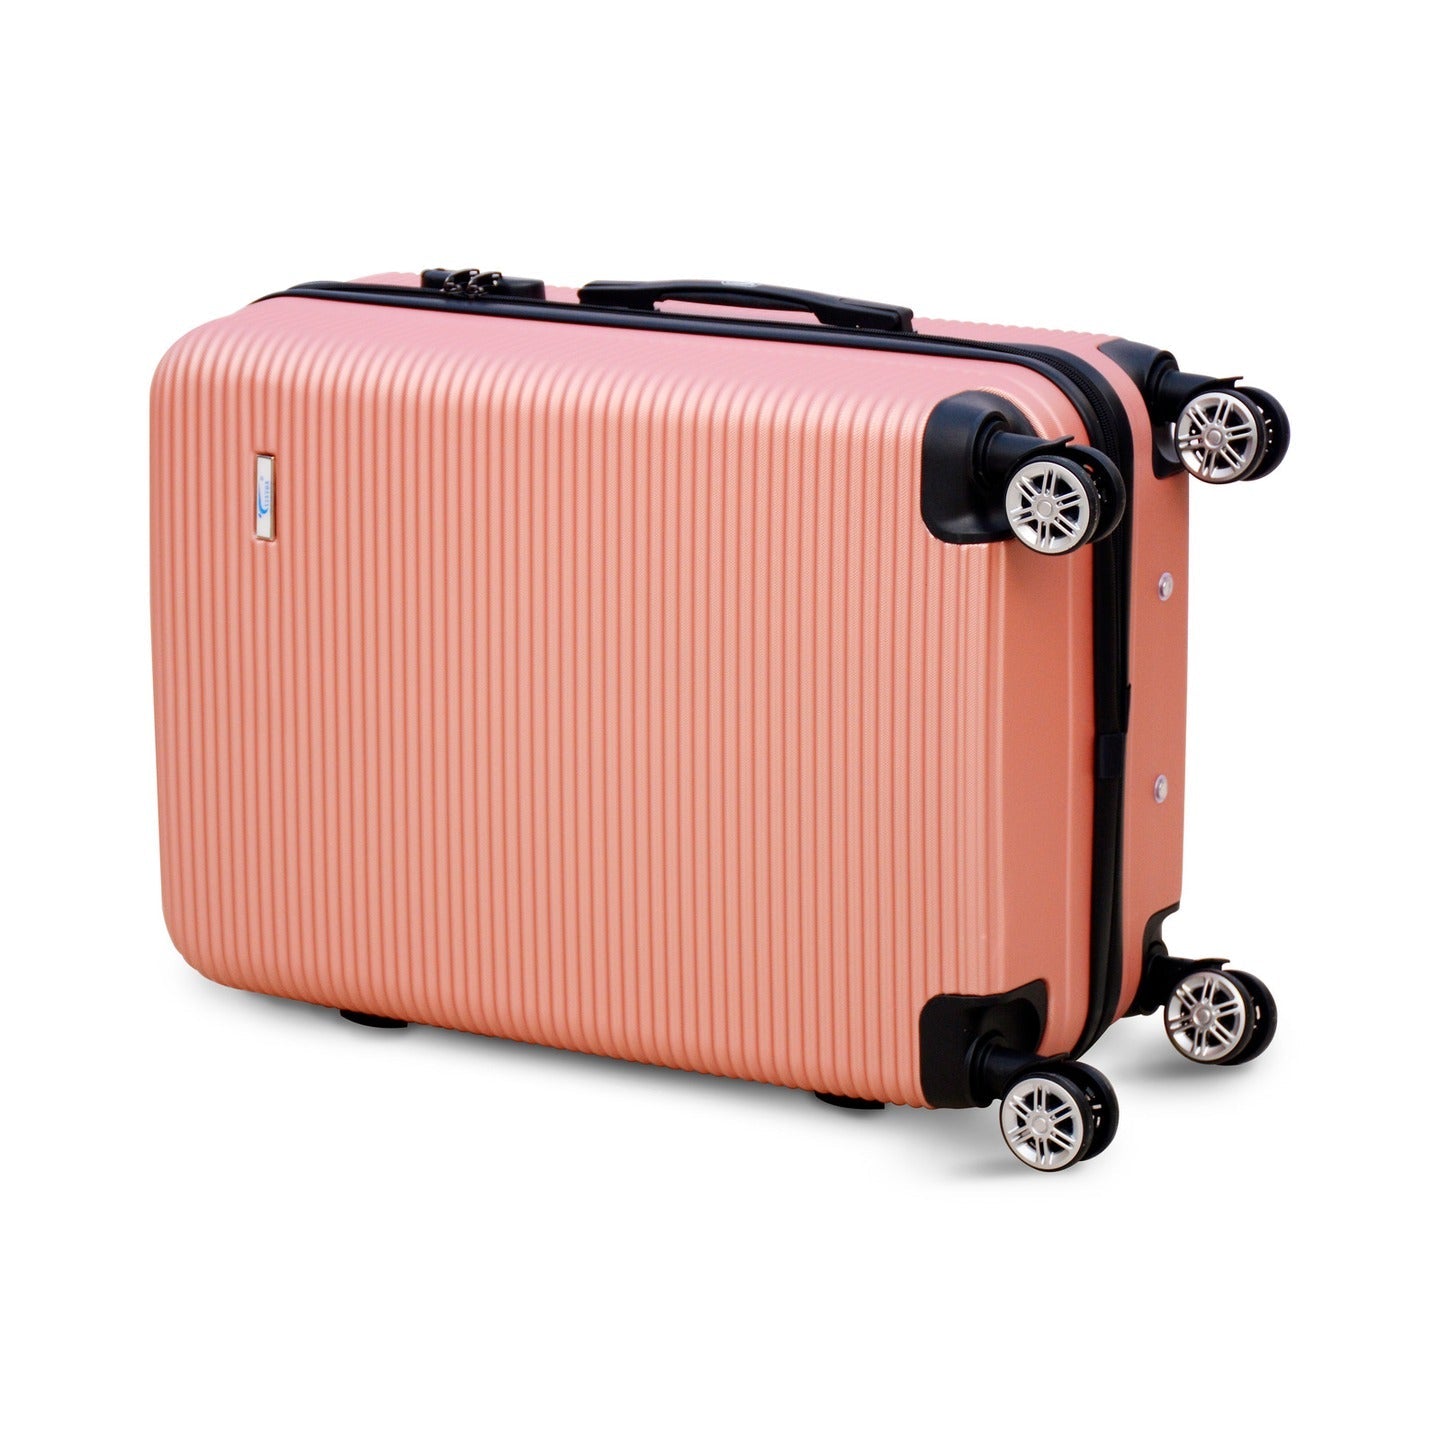 24" Dark Pink Colour JIAN ABS Line Luggage Lightweight Hard Case Trolley Bag With Spinner Wheel